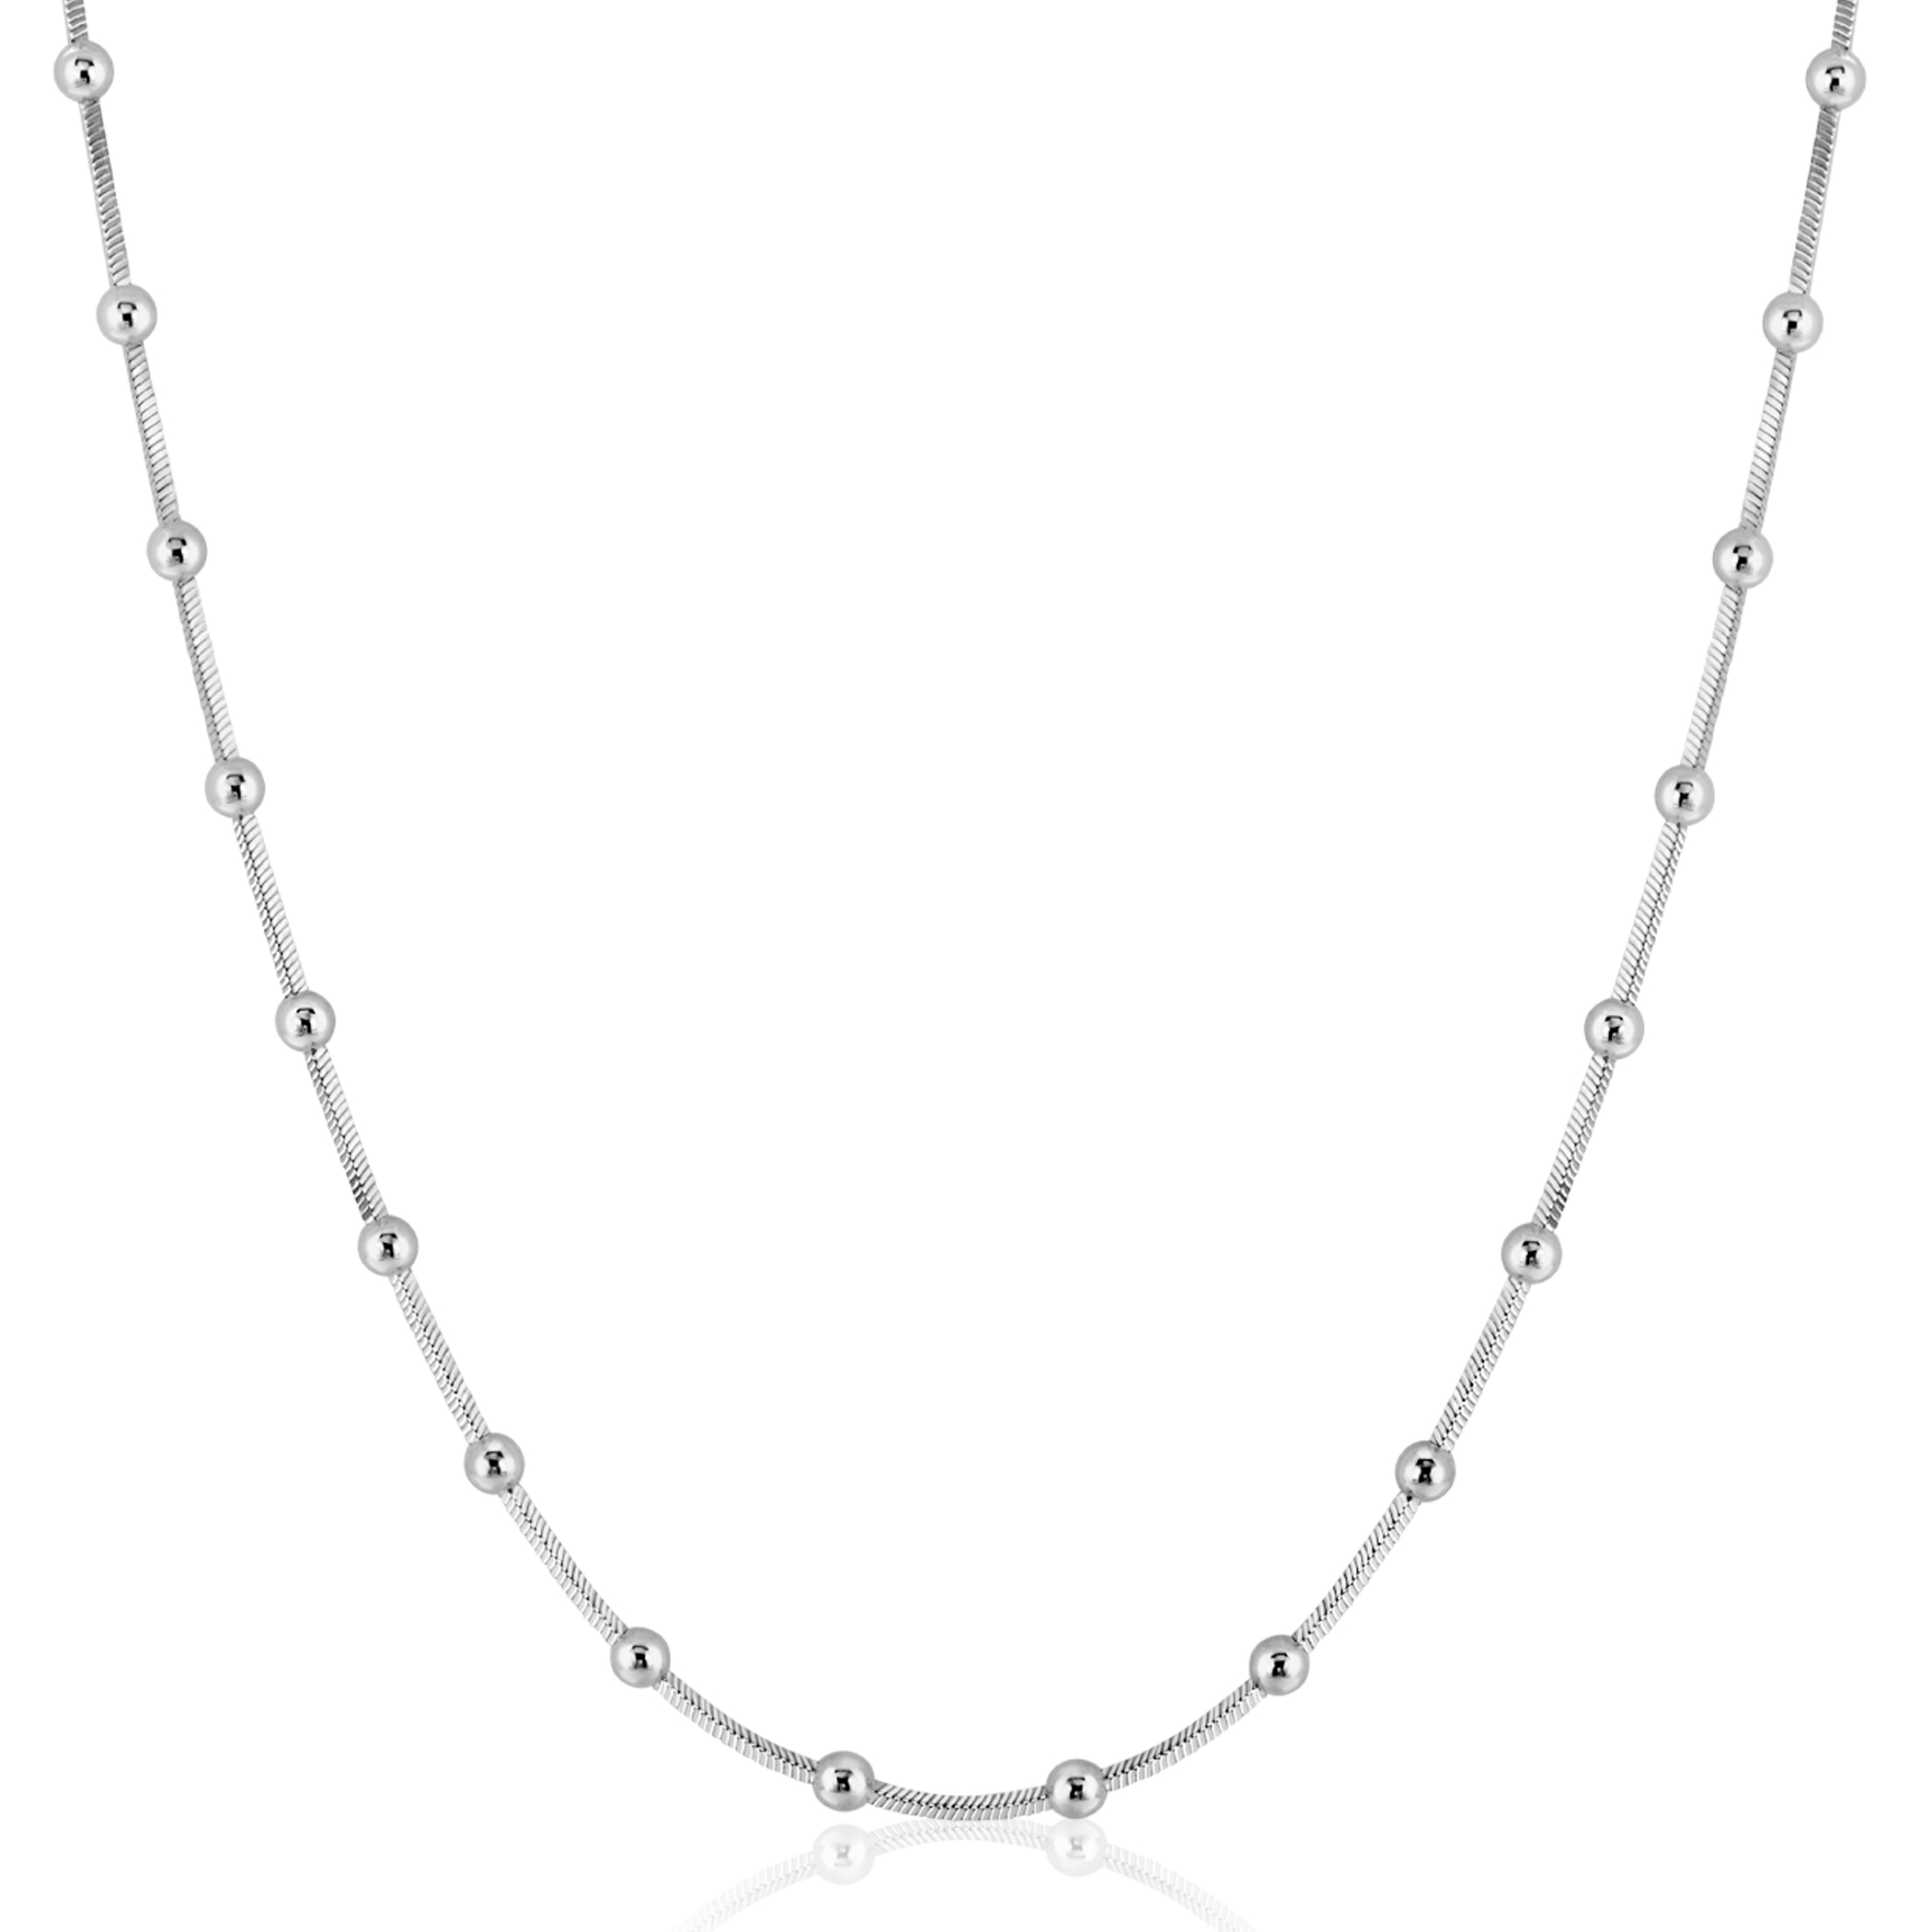 ZINZI Sterling Silver Snake Chain Necklace with Square Cut Chains and 40 Refined Shiny Beads (2,5mm width) 43-45cm ZIC2471